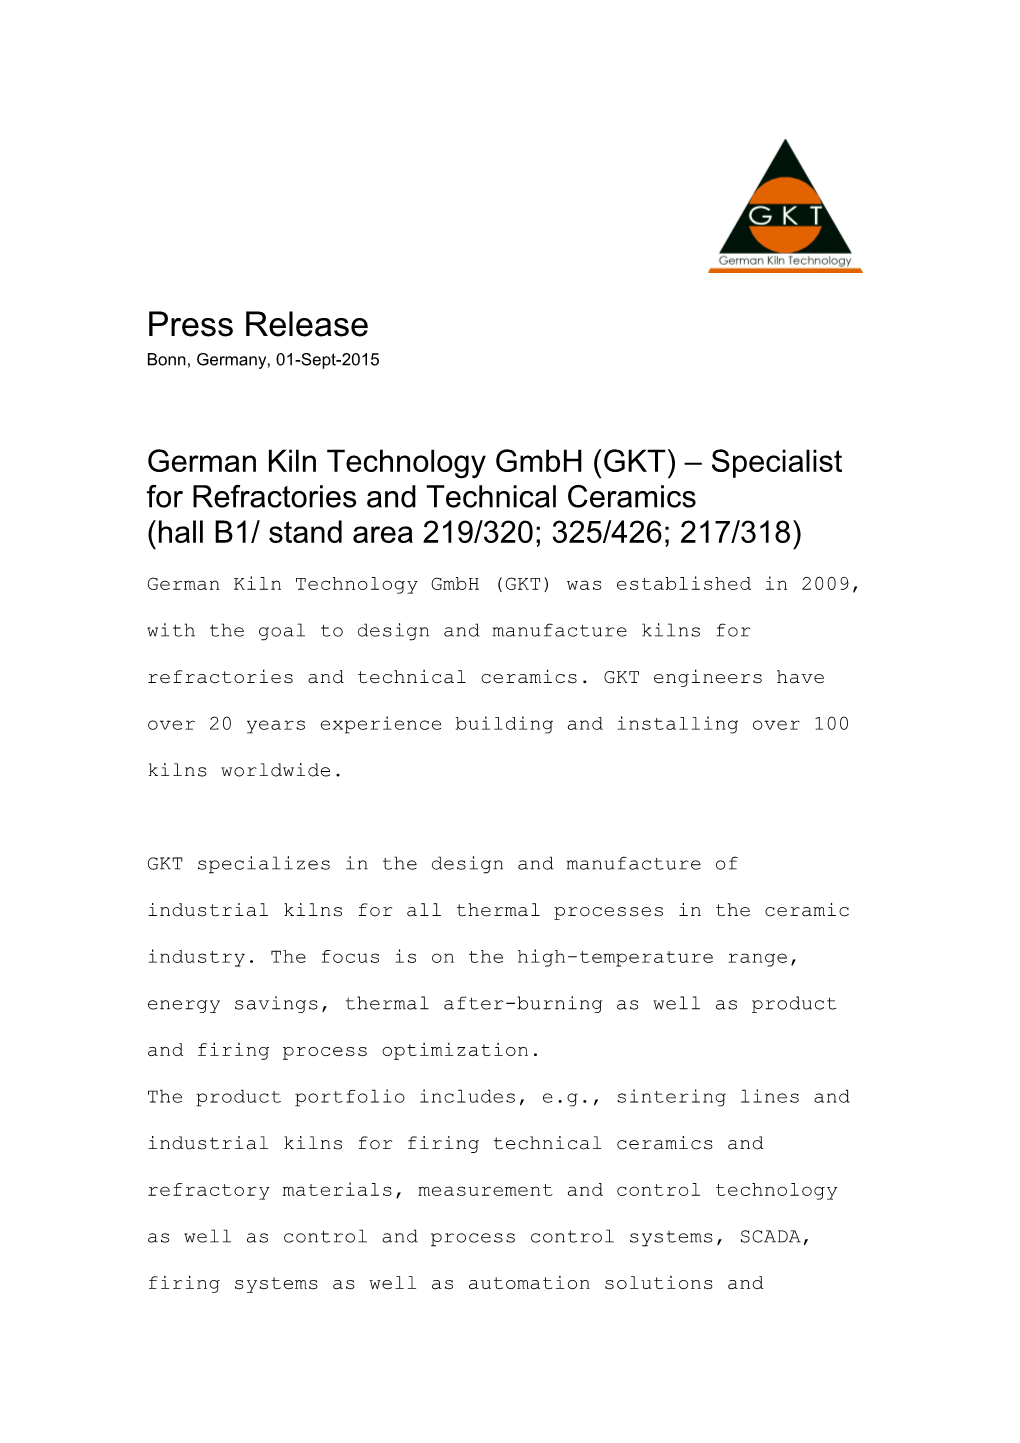 German Kiln Technology Gmbh (GKT) Specialist for Refractories and Technical Ceramics